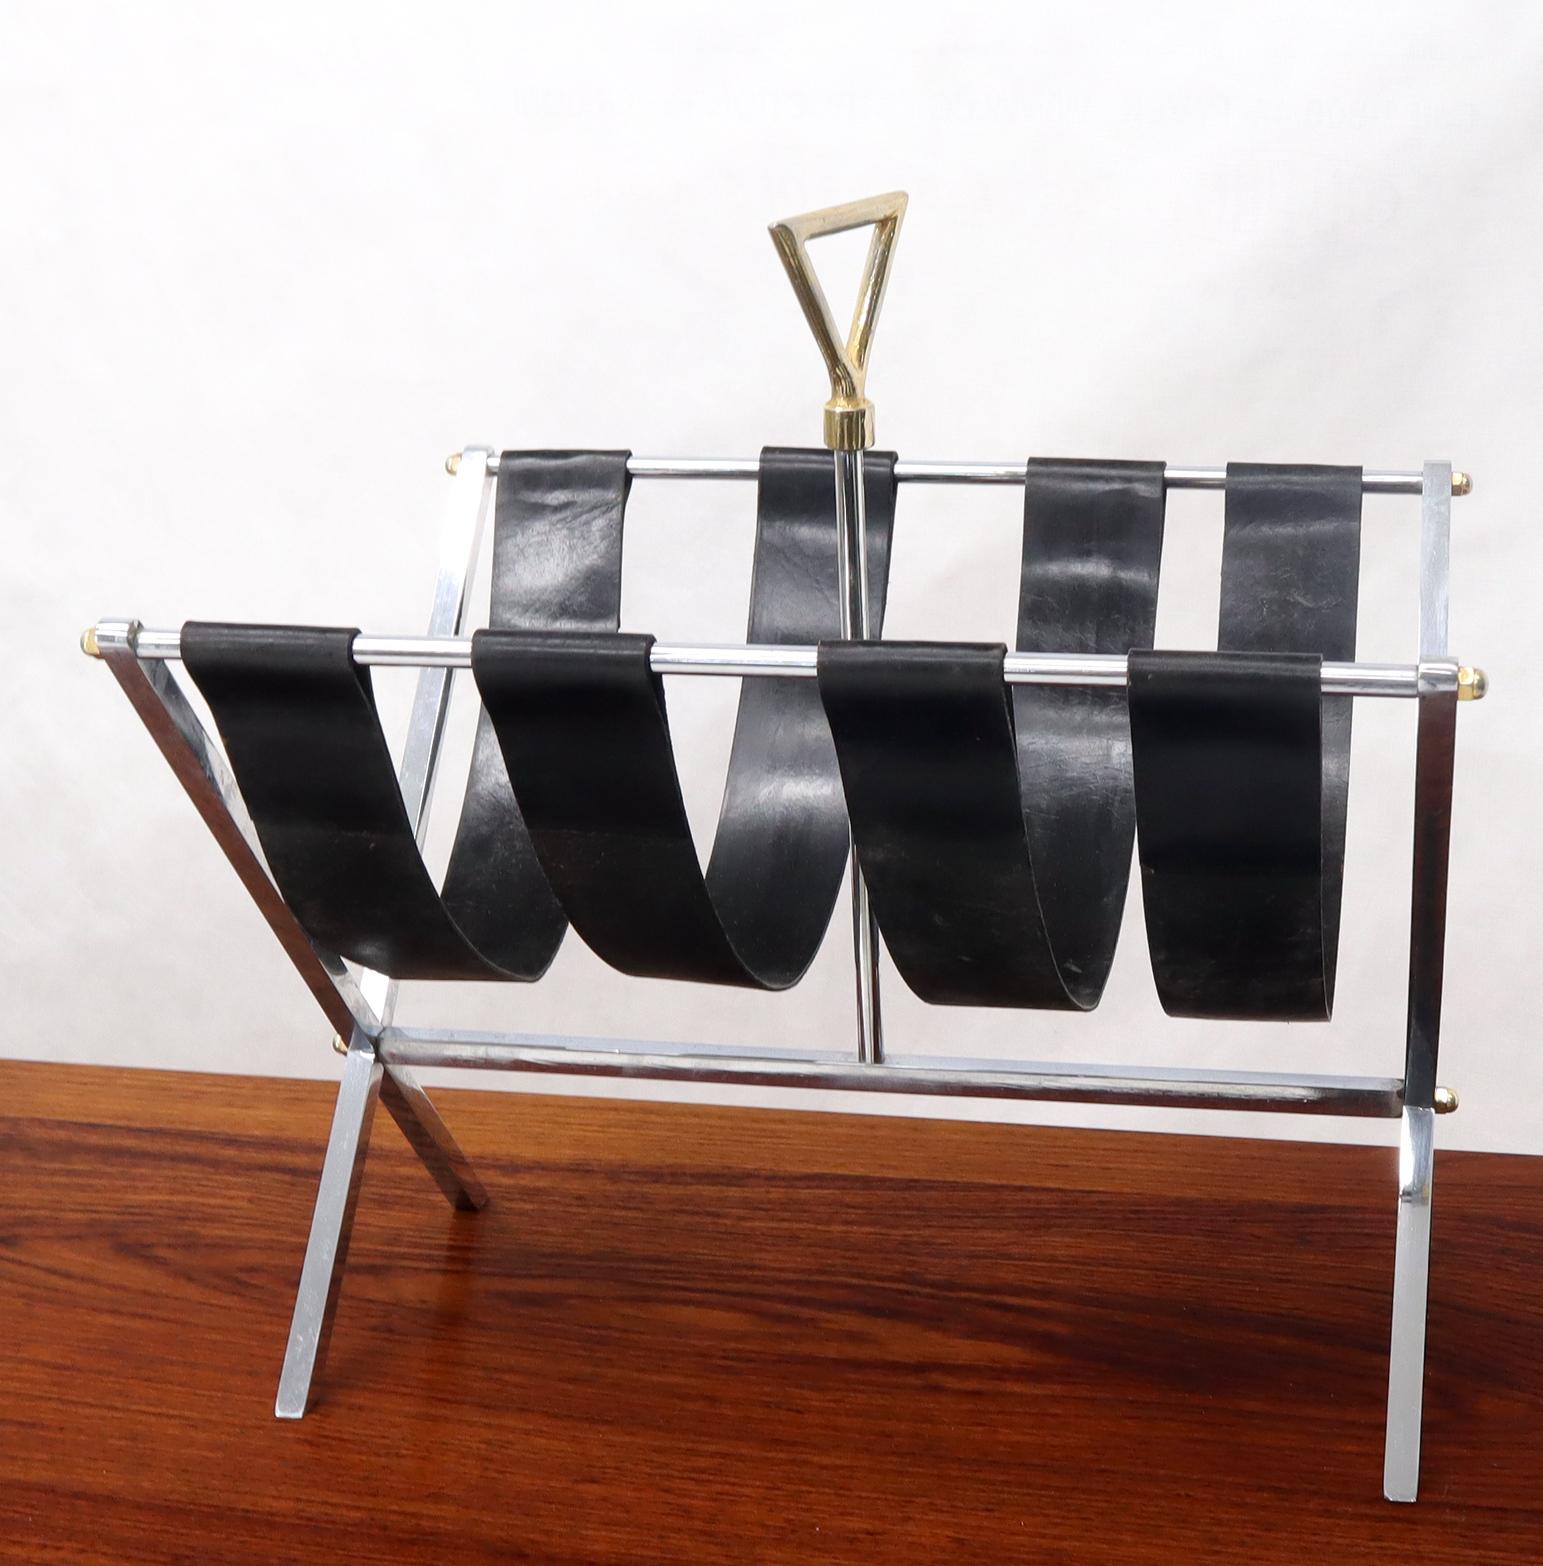 20th Century Machined Chrome Bar X Base Brass Nuts and Leather Belts Magazine Rack Shelf For Sale